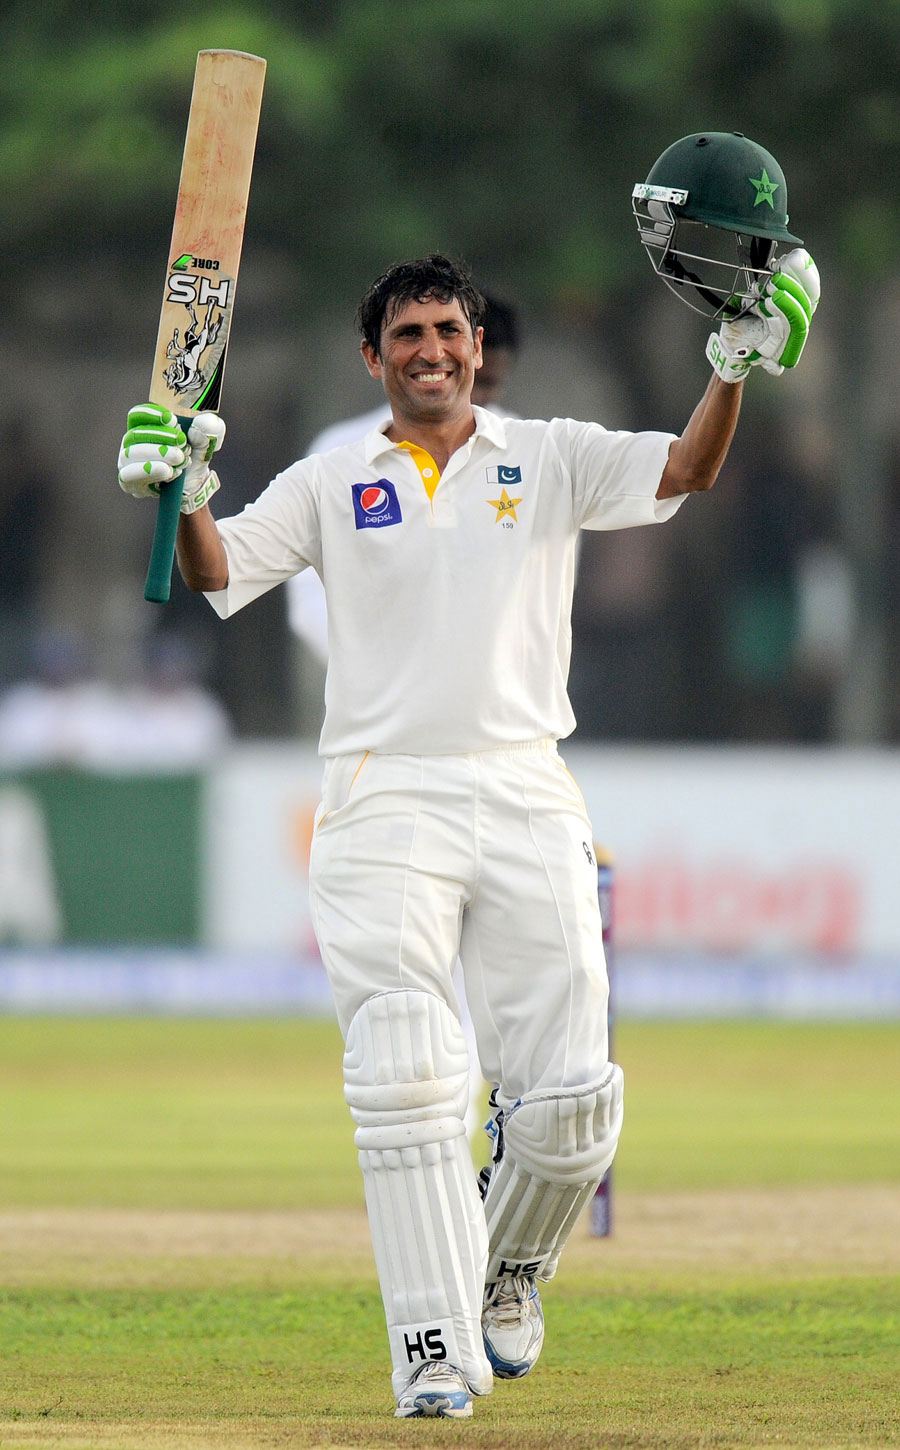 Younis Khan after scoring his 24th Century | Photo Courtesy: Cricinfo